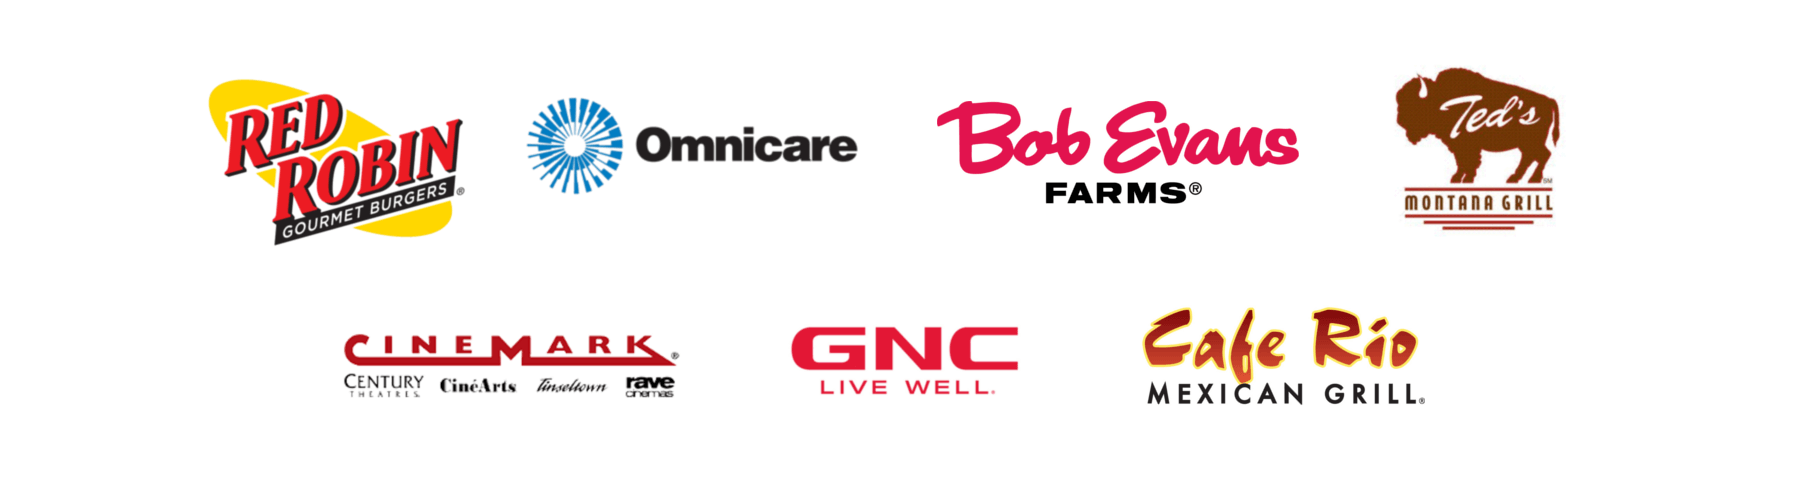 Red Robin, Omnicare, Bob Evans Farms, Ted's Montana Grill, Cinemark, GNC, Cafe Rio Mexican Grill